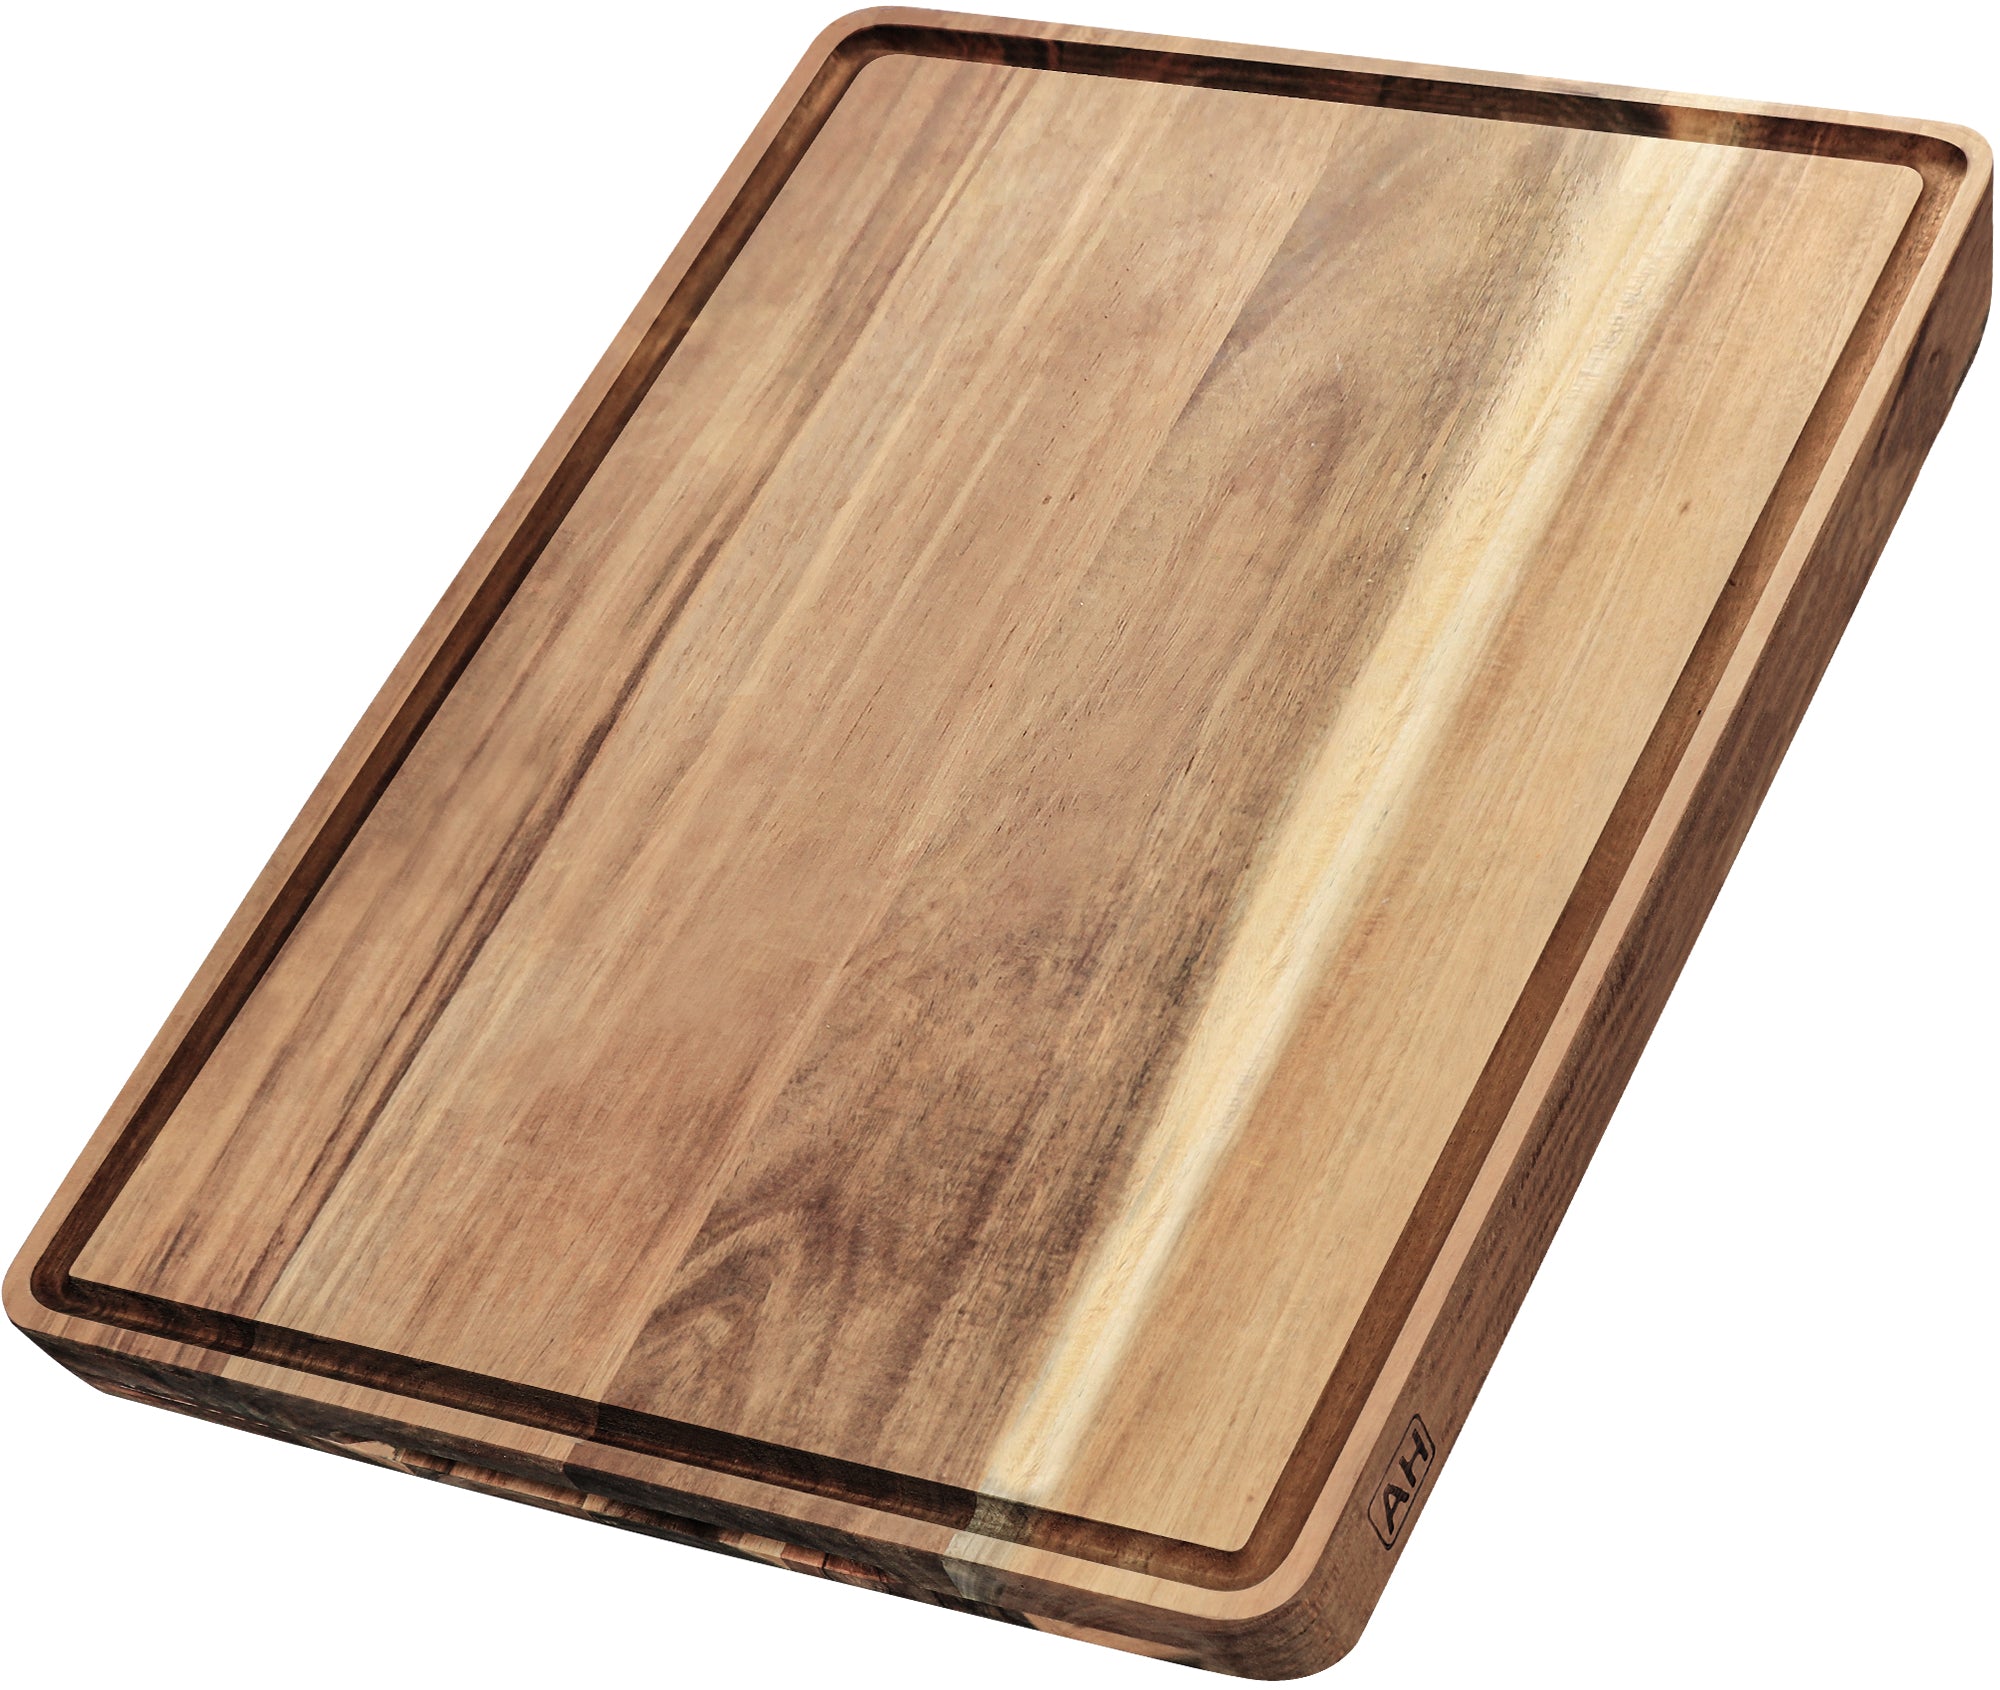 Large Wood Cutting Board With Juice Groove 18x12 Inches Wood 